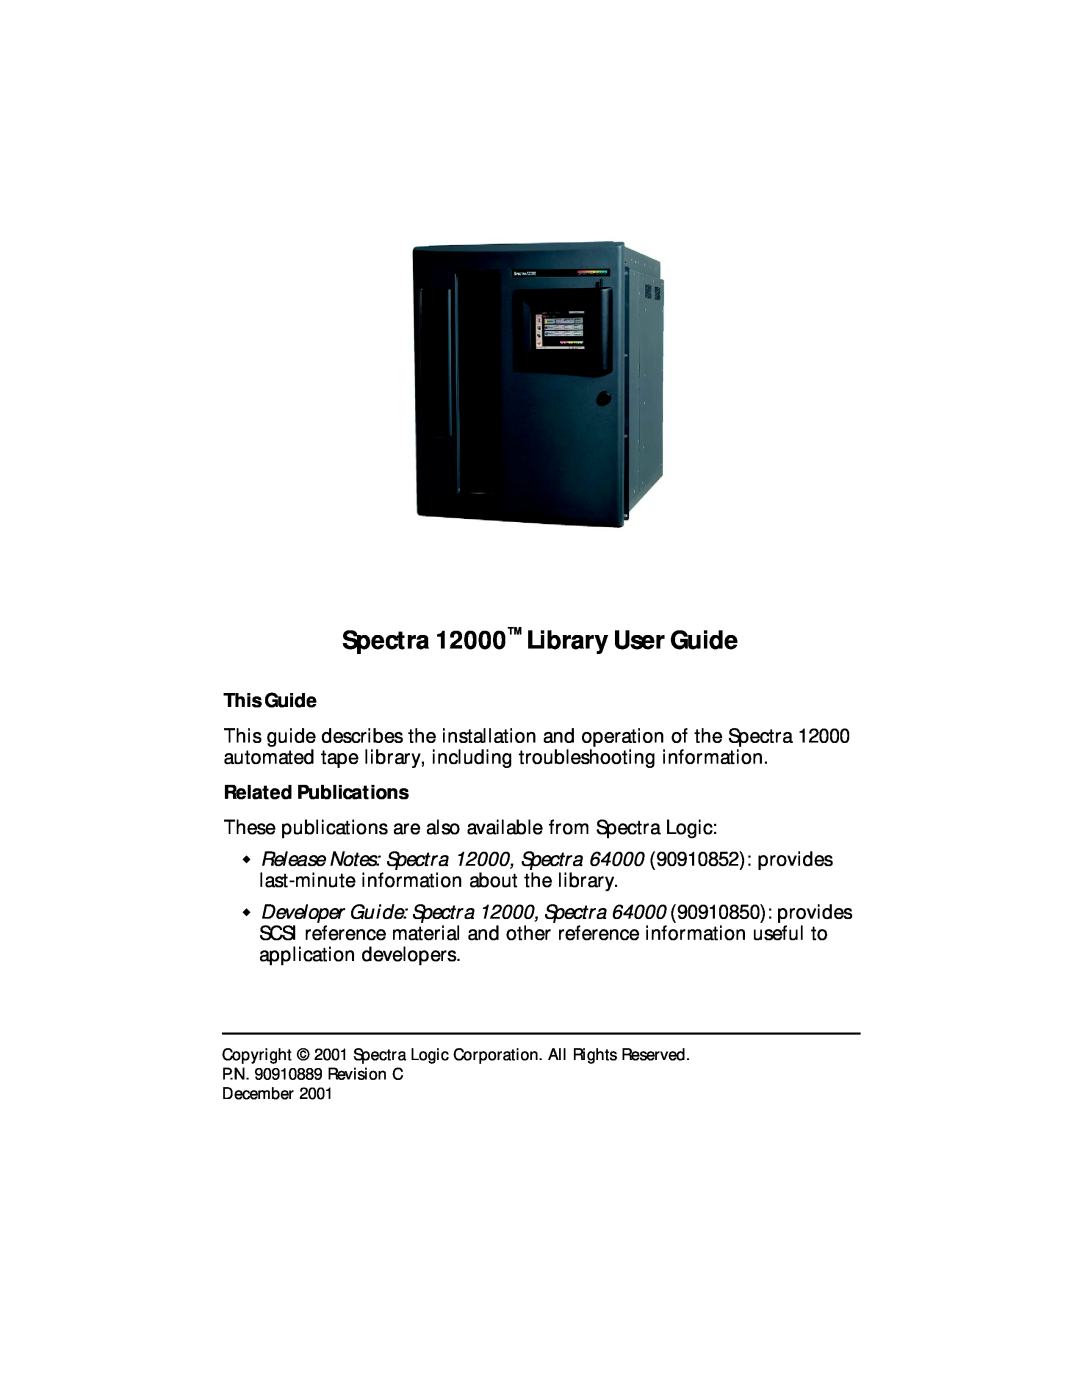 Spectra Logic manual This Guide, Related Publications, Spectra 12000 Library User Guide 